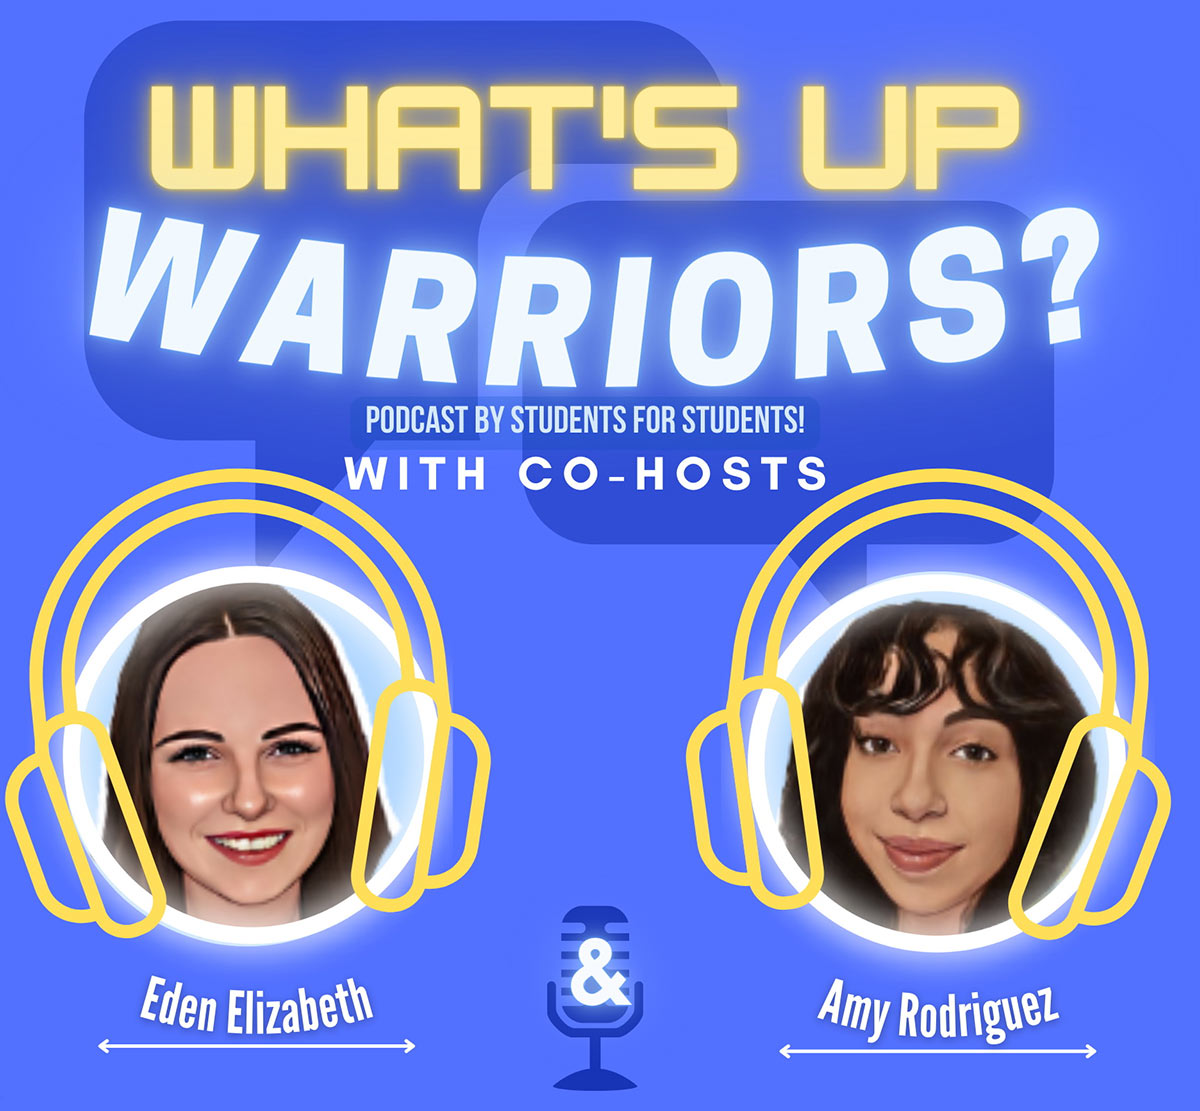 What's up, Warriors? Podcast by students for students. With co-hosts Eden Fritz Aguiar and Amarylisse Rodriguez